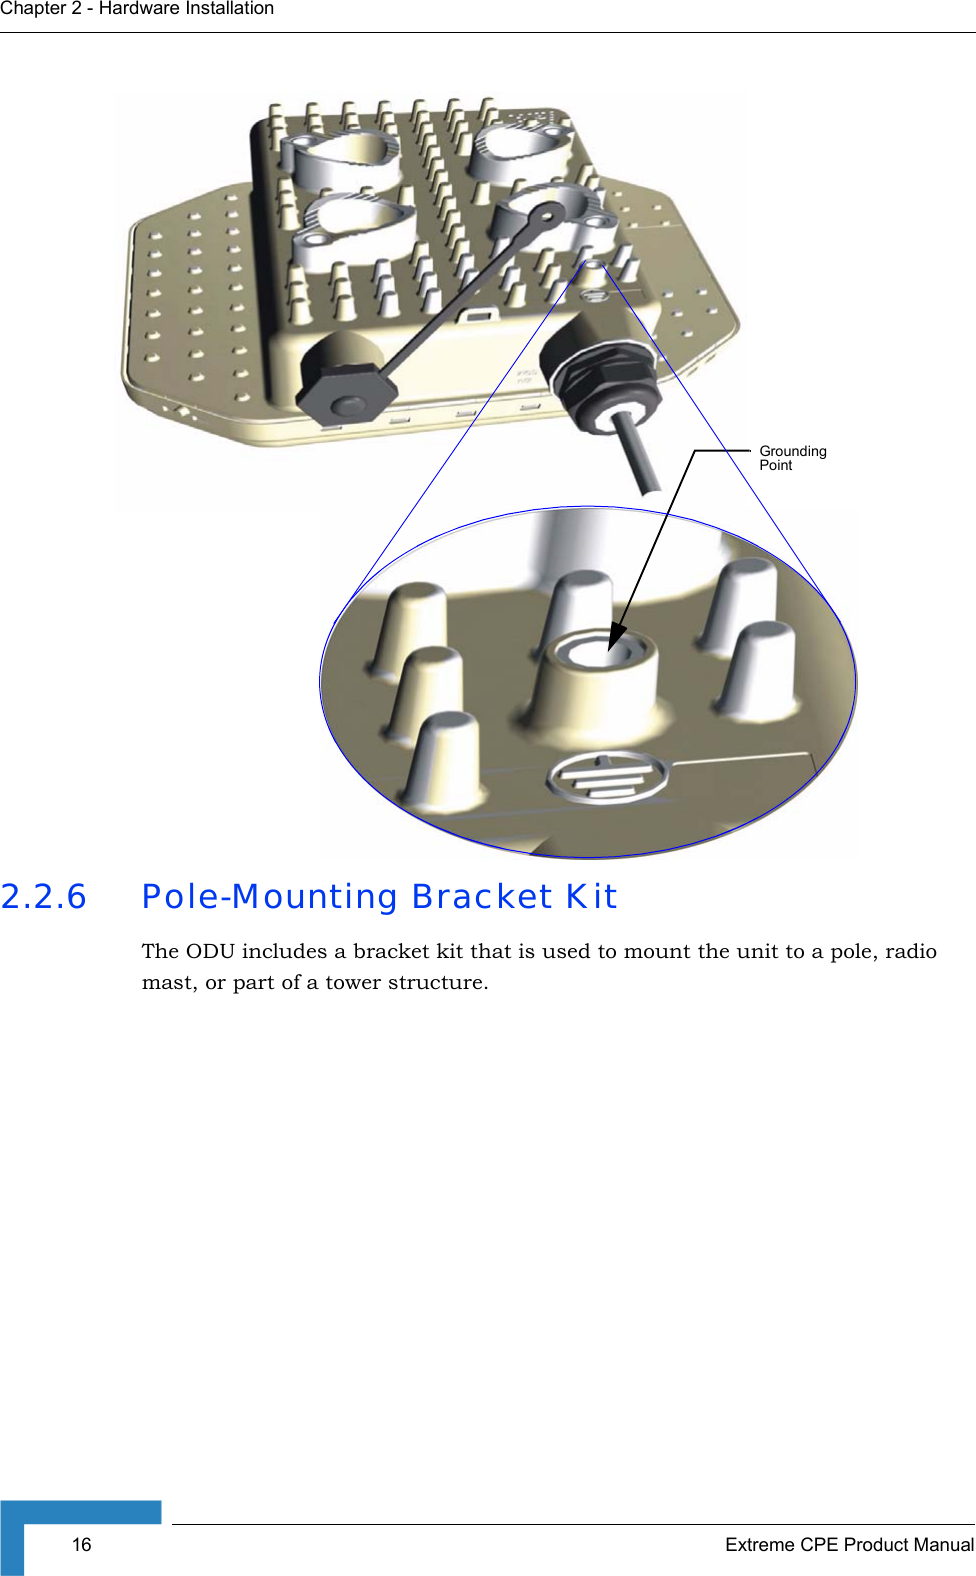 16 Extreme CPE Product ManualChapter 2 - Hardware Installation2.2.6 Pole-Mounting Bracket KitThe ODU includes a bracket kit that is used to mount the unit to a pole, radio mast, or part of a tower structure. Grounding Point